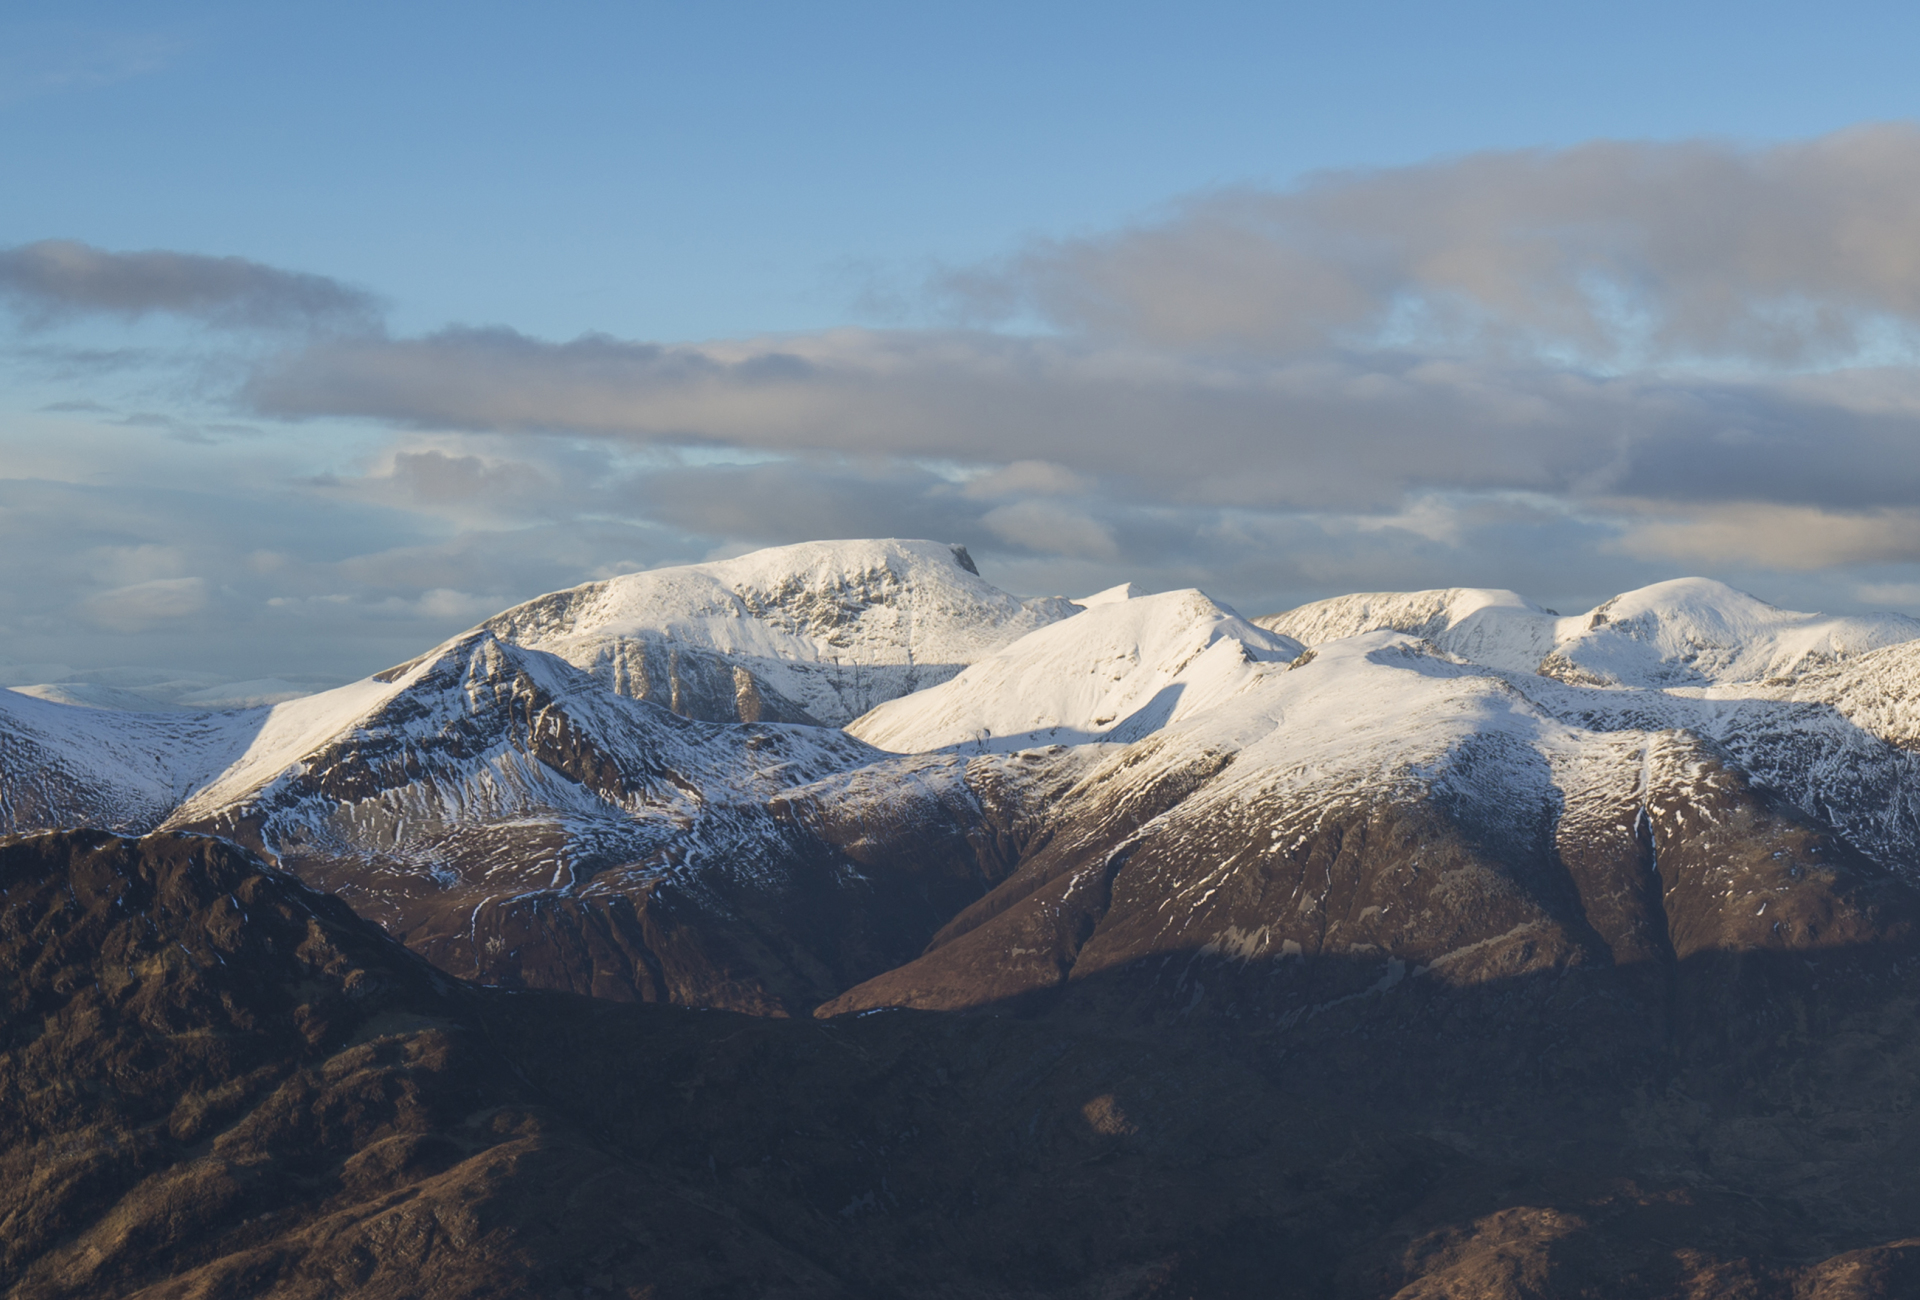 Ben Nevis and the Mamores